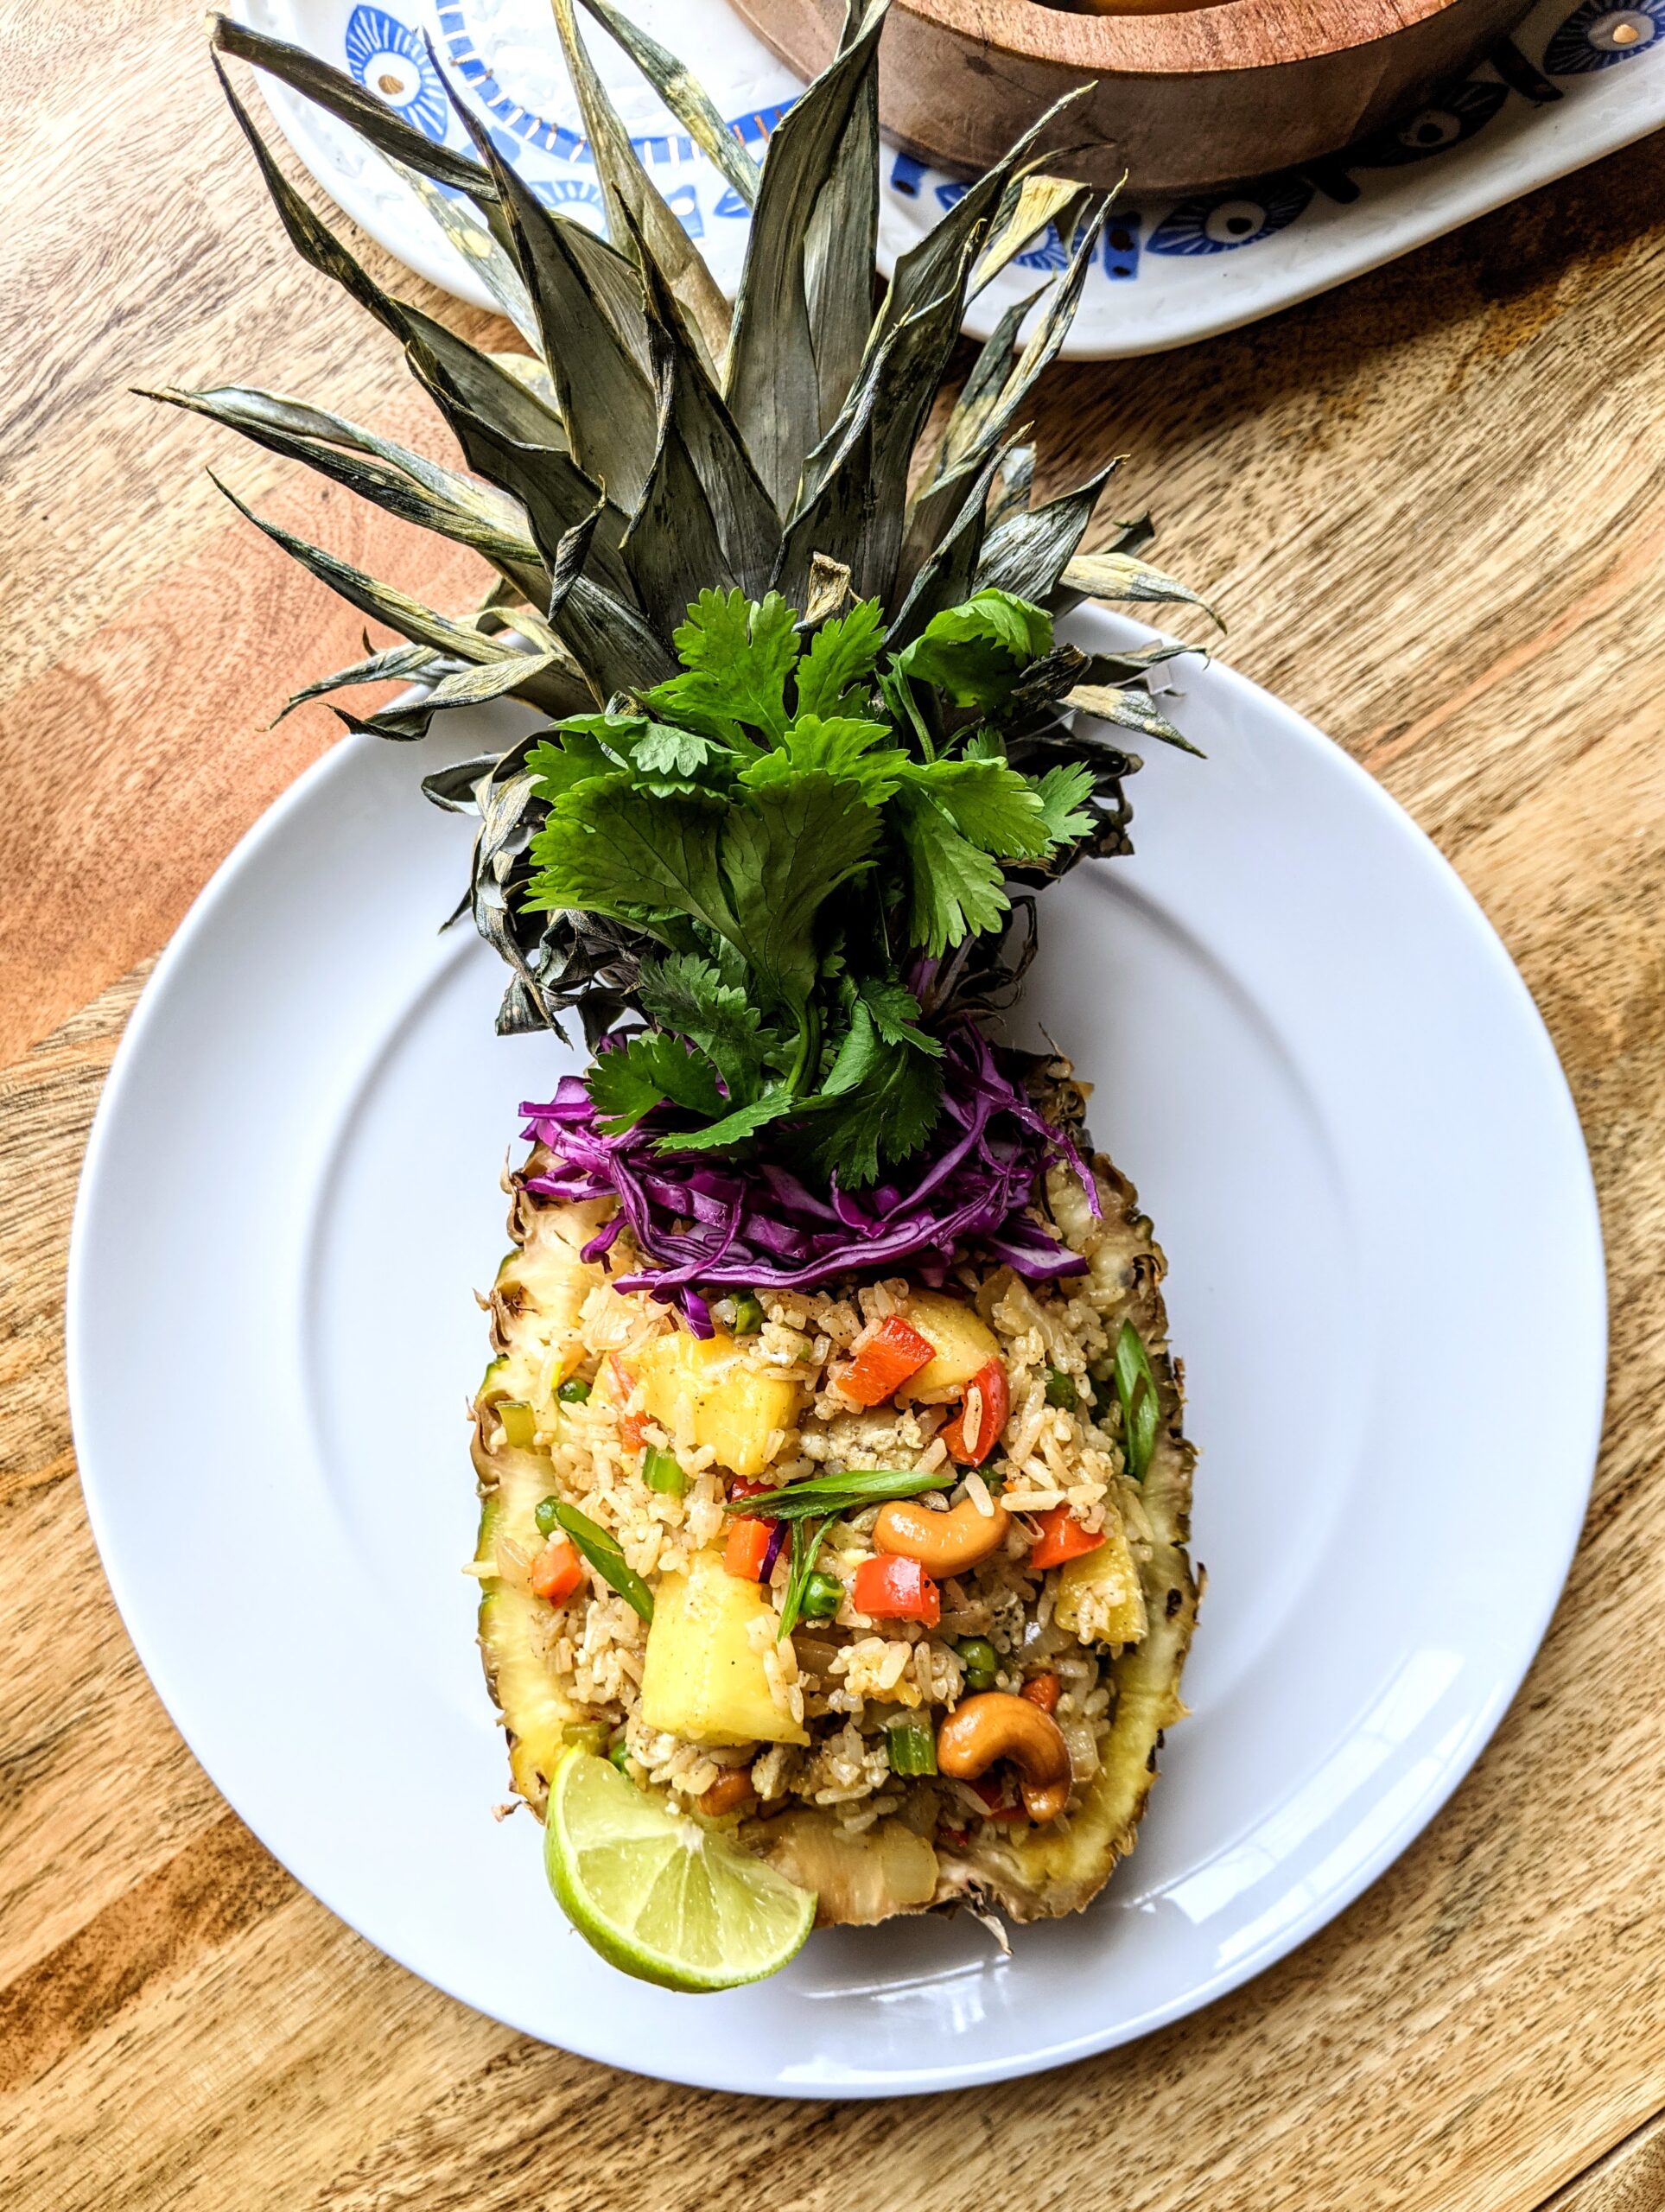 Authentic Thai-style pineapple fried rice served in a hollowed out pineapple. Topped with toasted cashews, fresh cilantro, and raw purple cabbage.